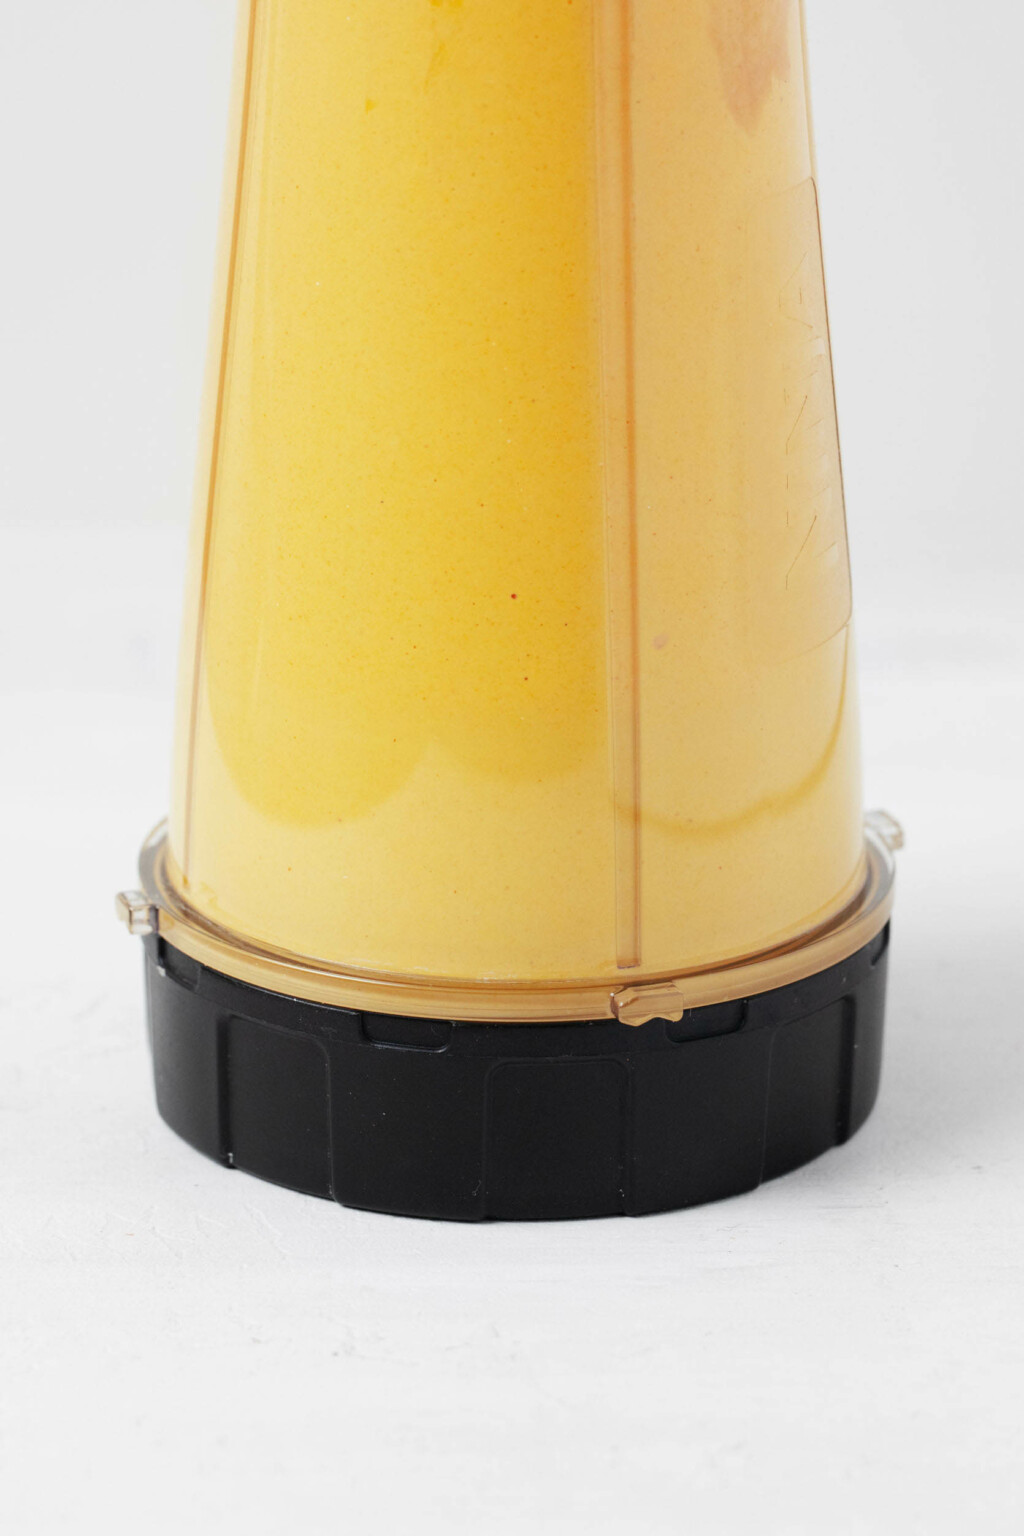 A personal blender is being used to blend a bright yellow colored sauce.